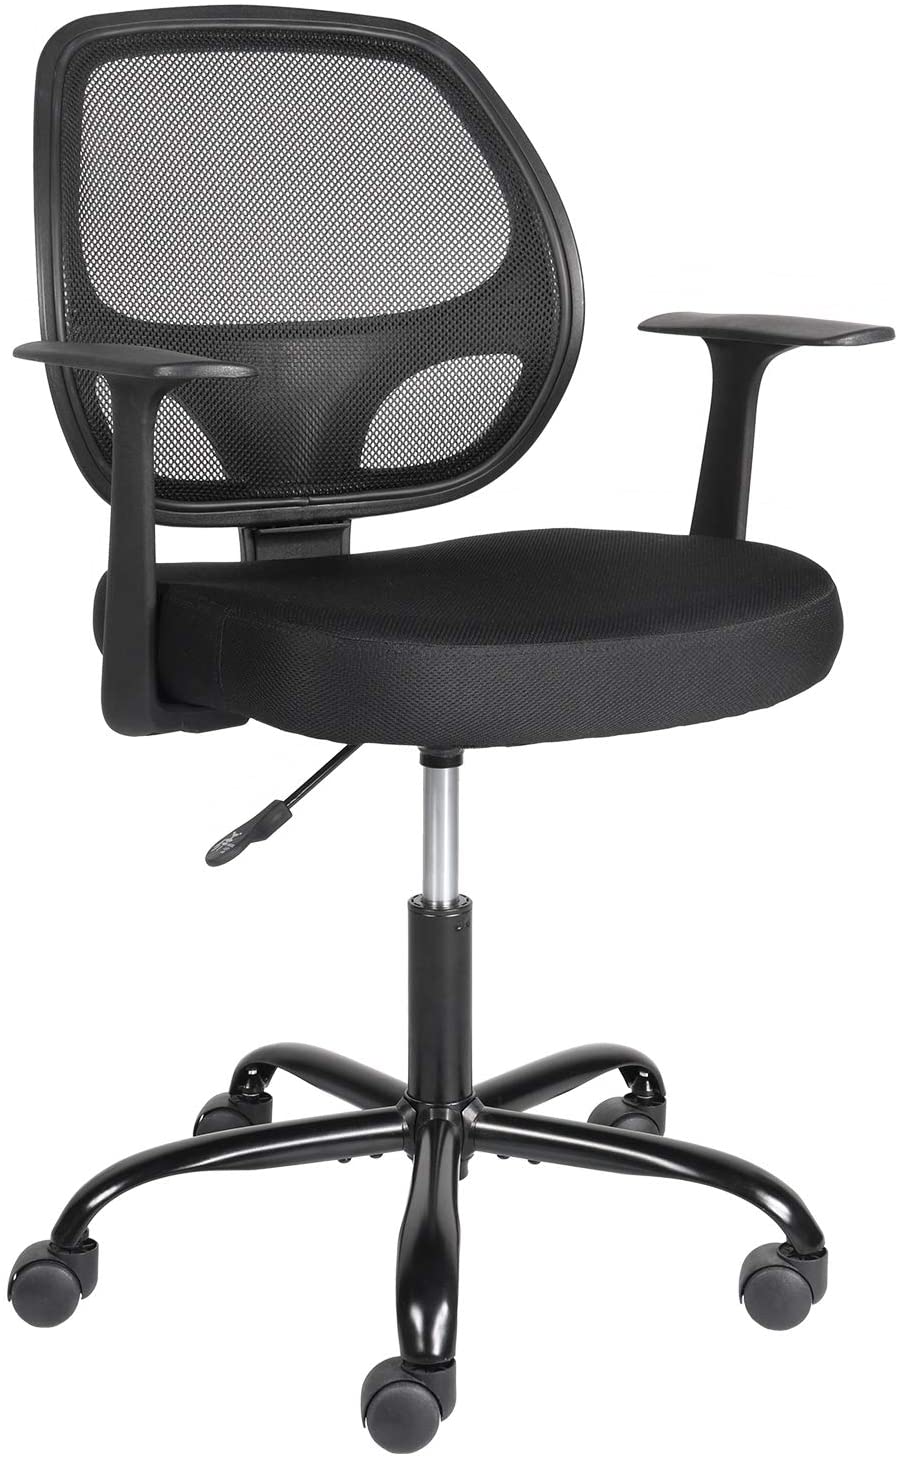 Home Office Chair Desk Chair Mid Back Mesh Computer Chair with Lumbar Support Swivel Rolling Chair